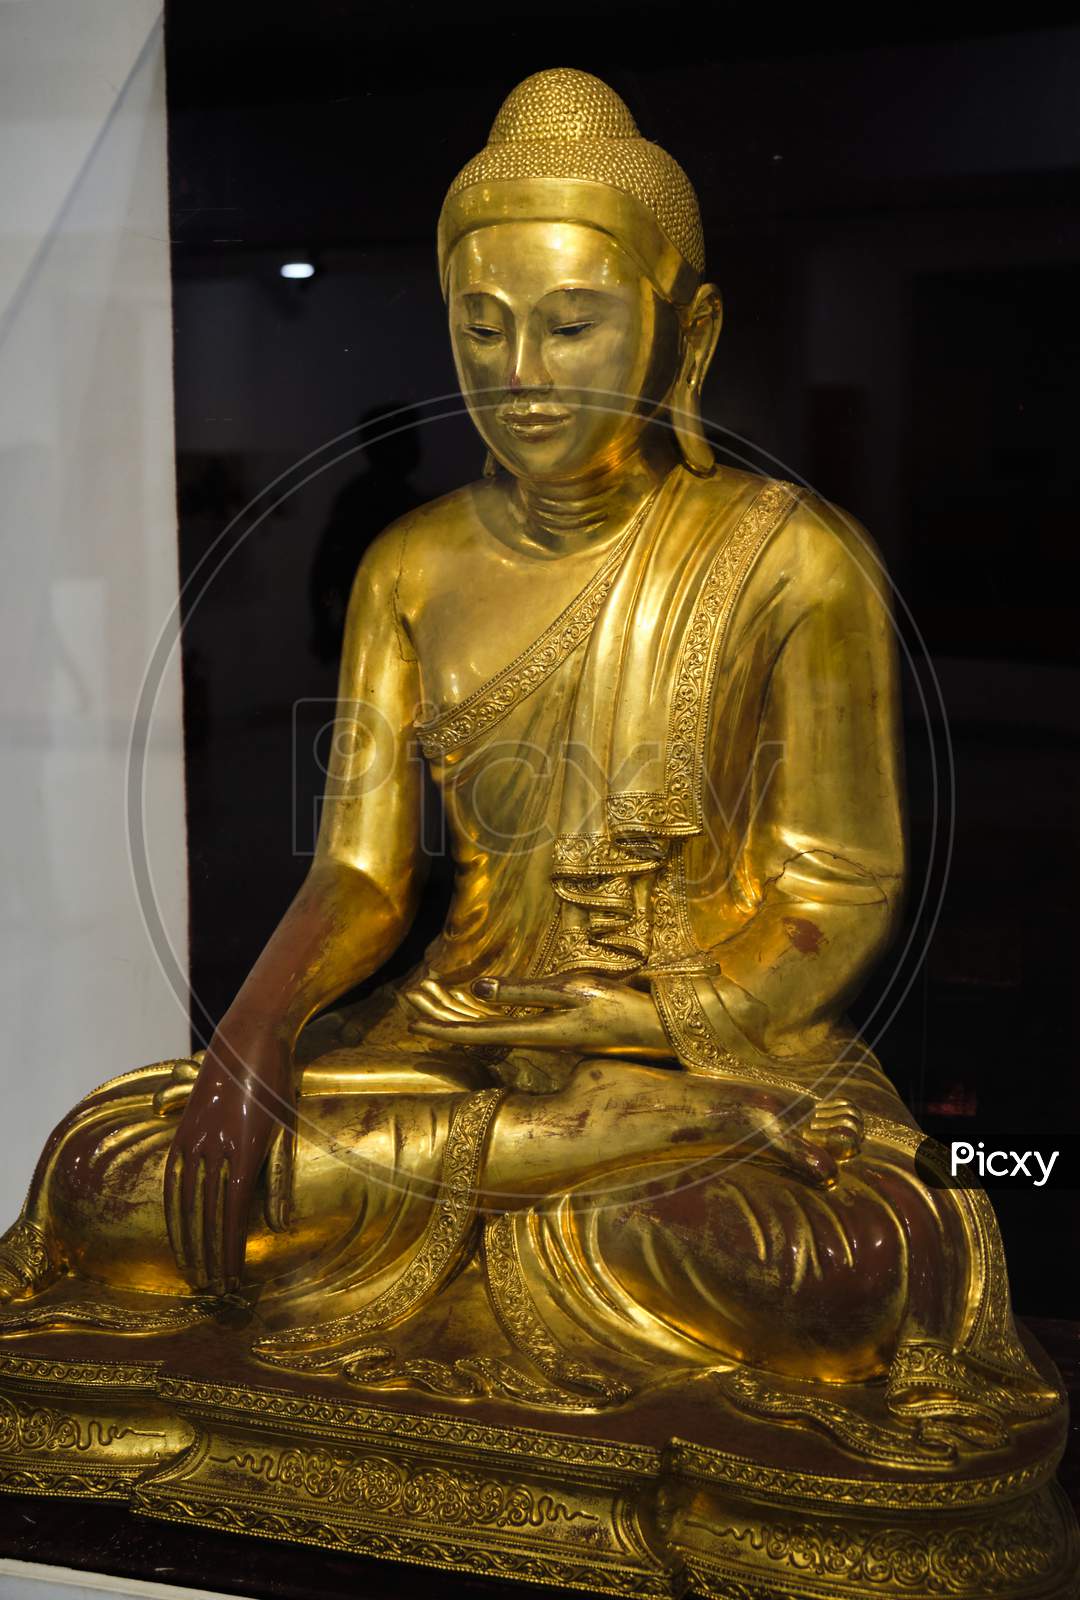 Gilded Statue Of A Buddha In The National Museum Of India In New Delhi